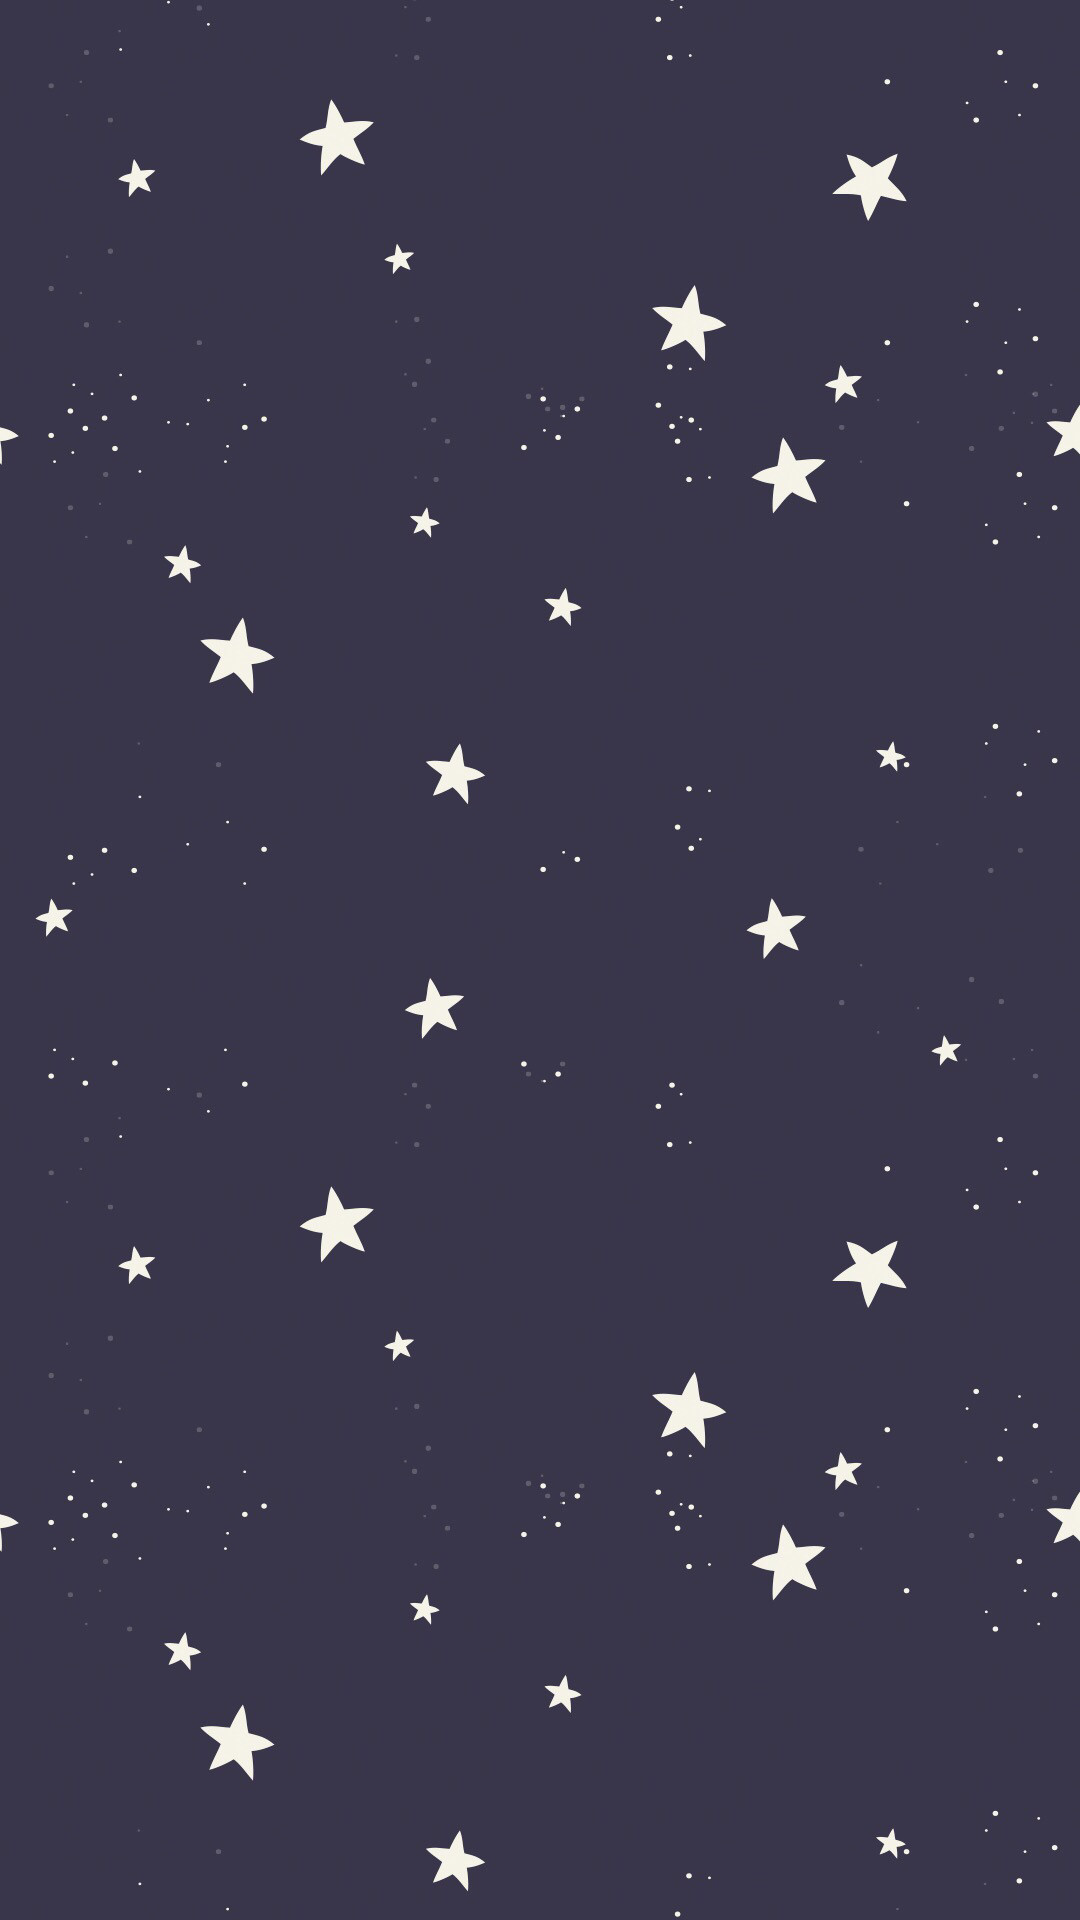 1080x1920 Simple stars pattern wallpaper great for backgrounds on iPhones and iPads